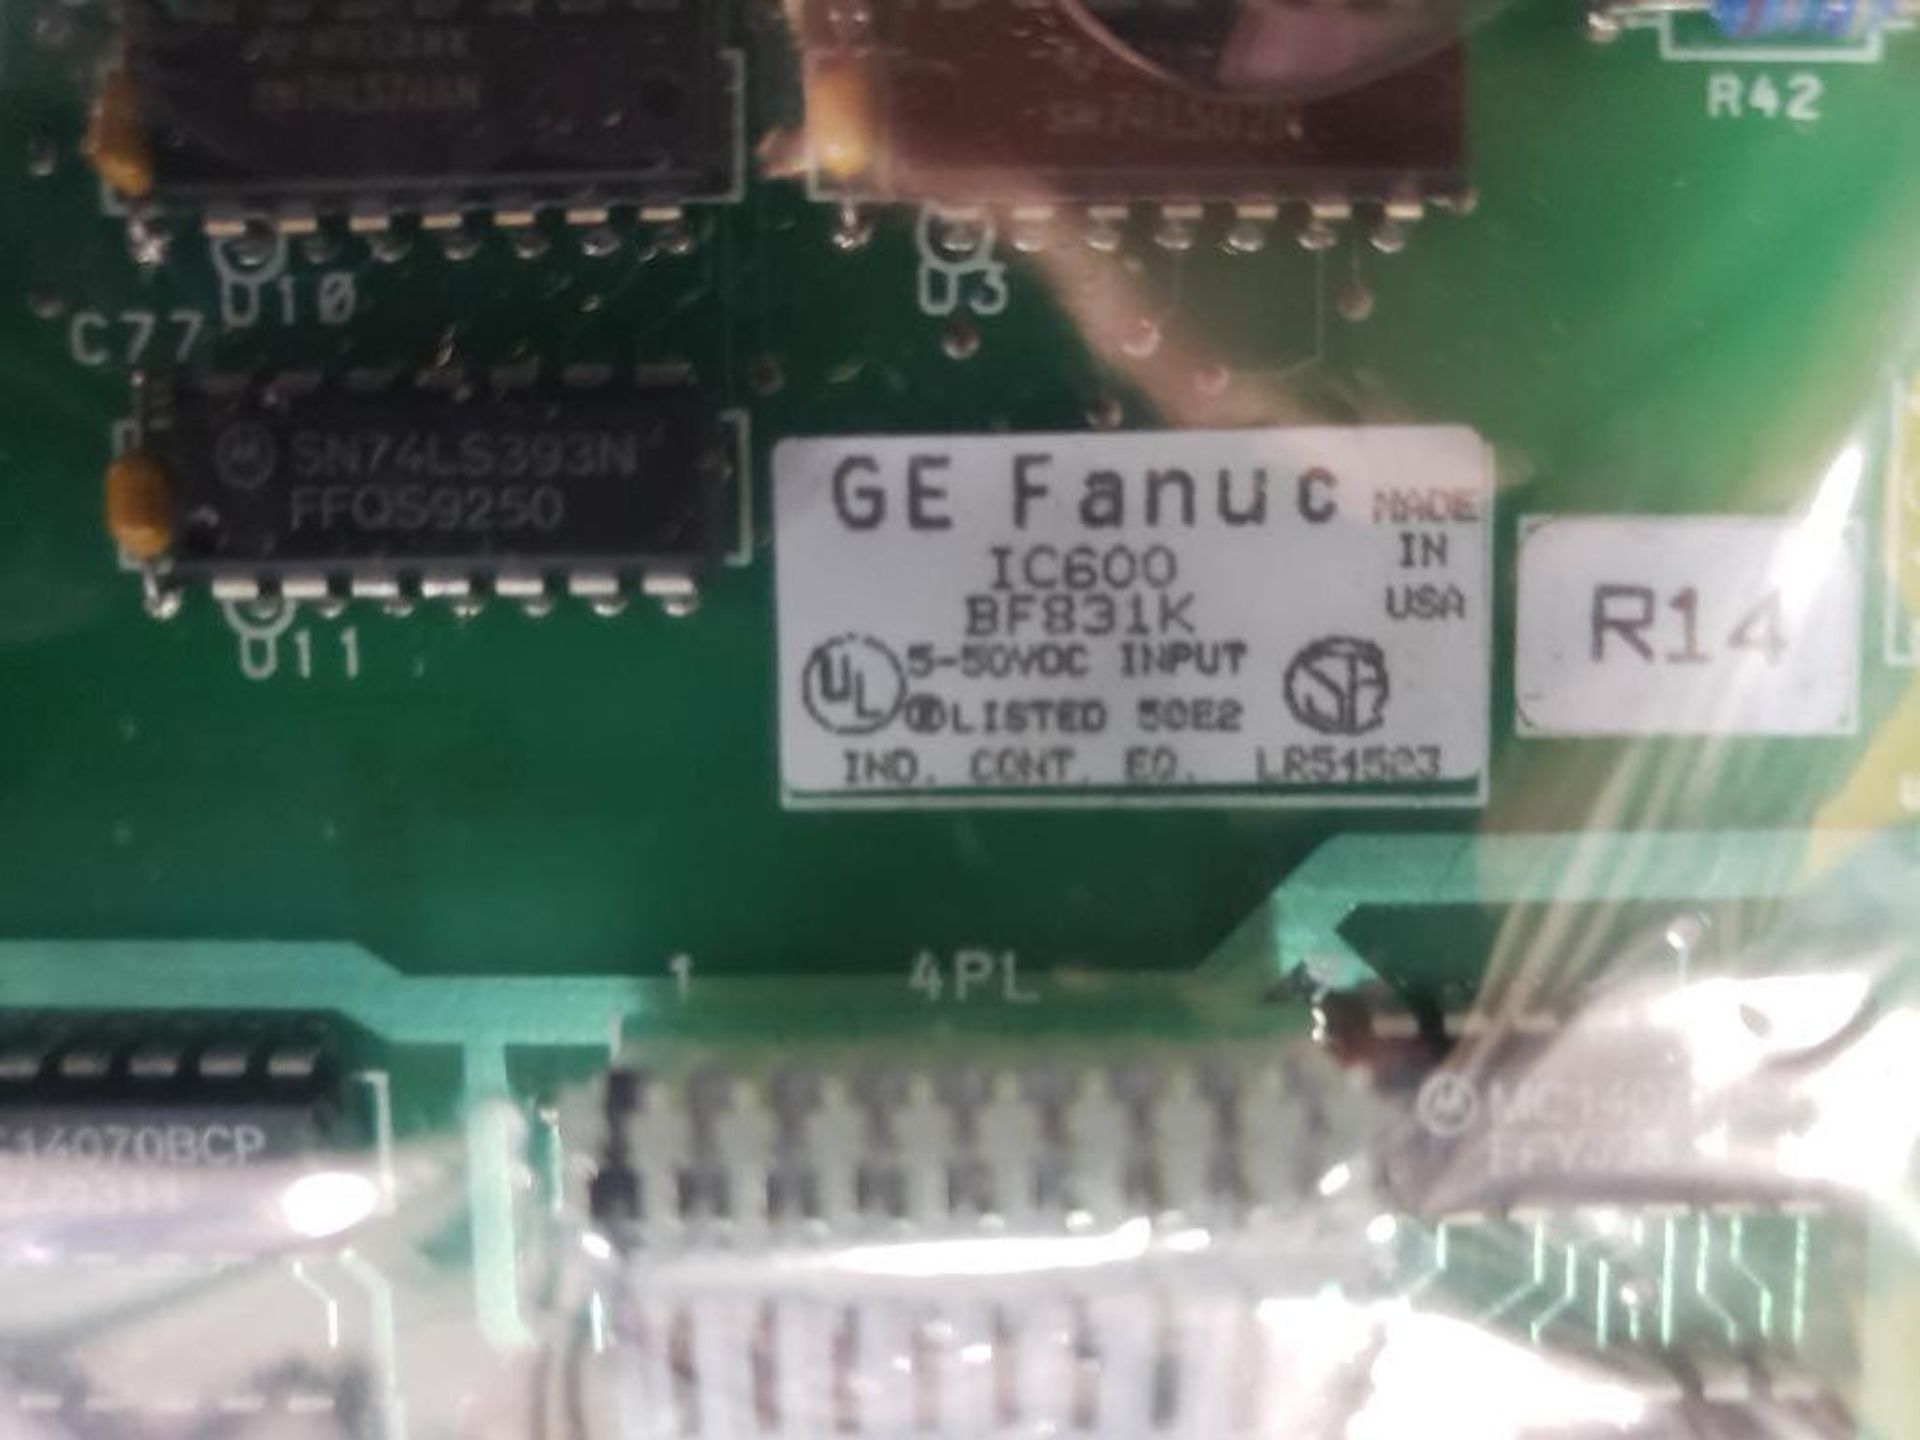 Qty 3 - Assorted GE Fanuc boards. Open boxes, appear refurb. units. - Image 7 of 9